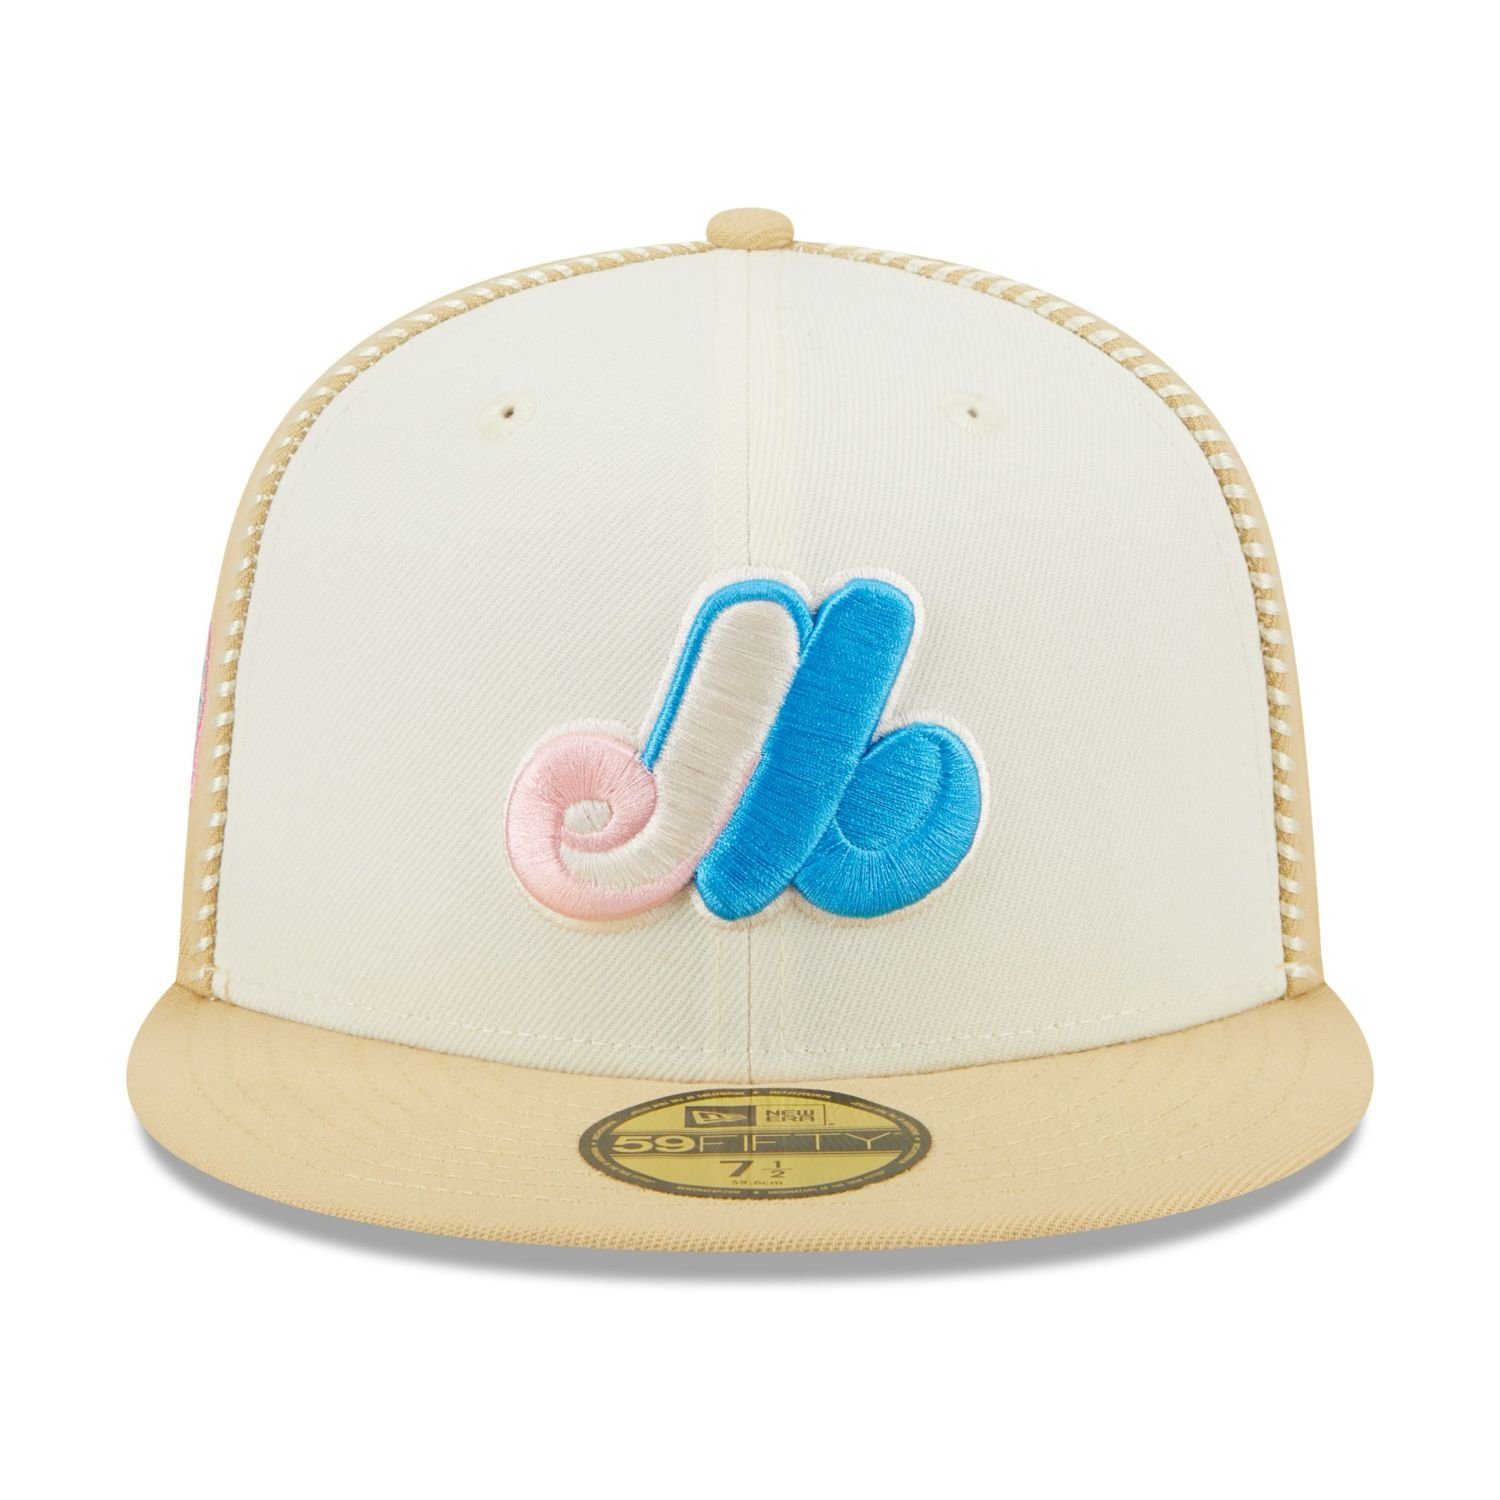 New Era Fitted Cap Expos STITCH SEAM Montreal 59Fifty